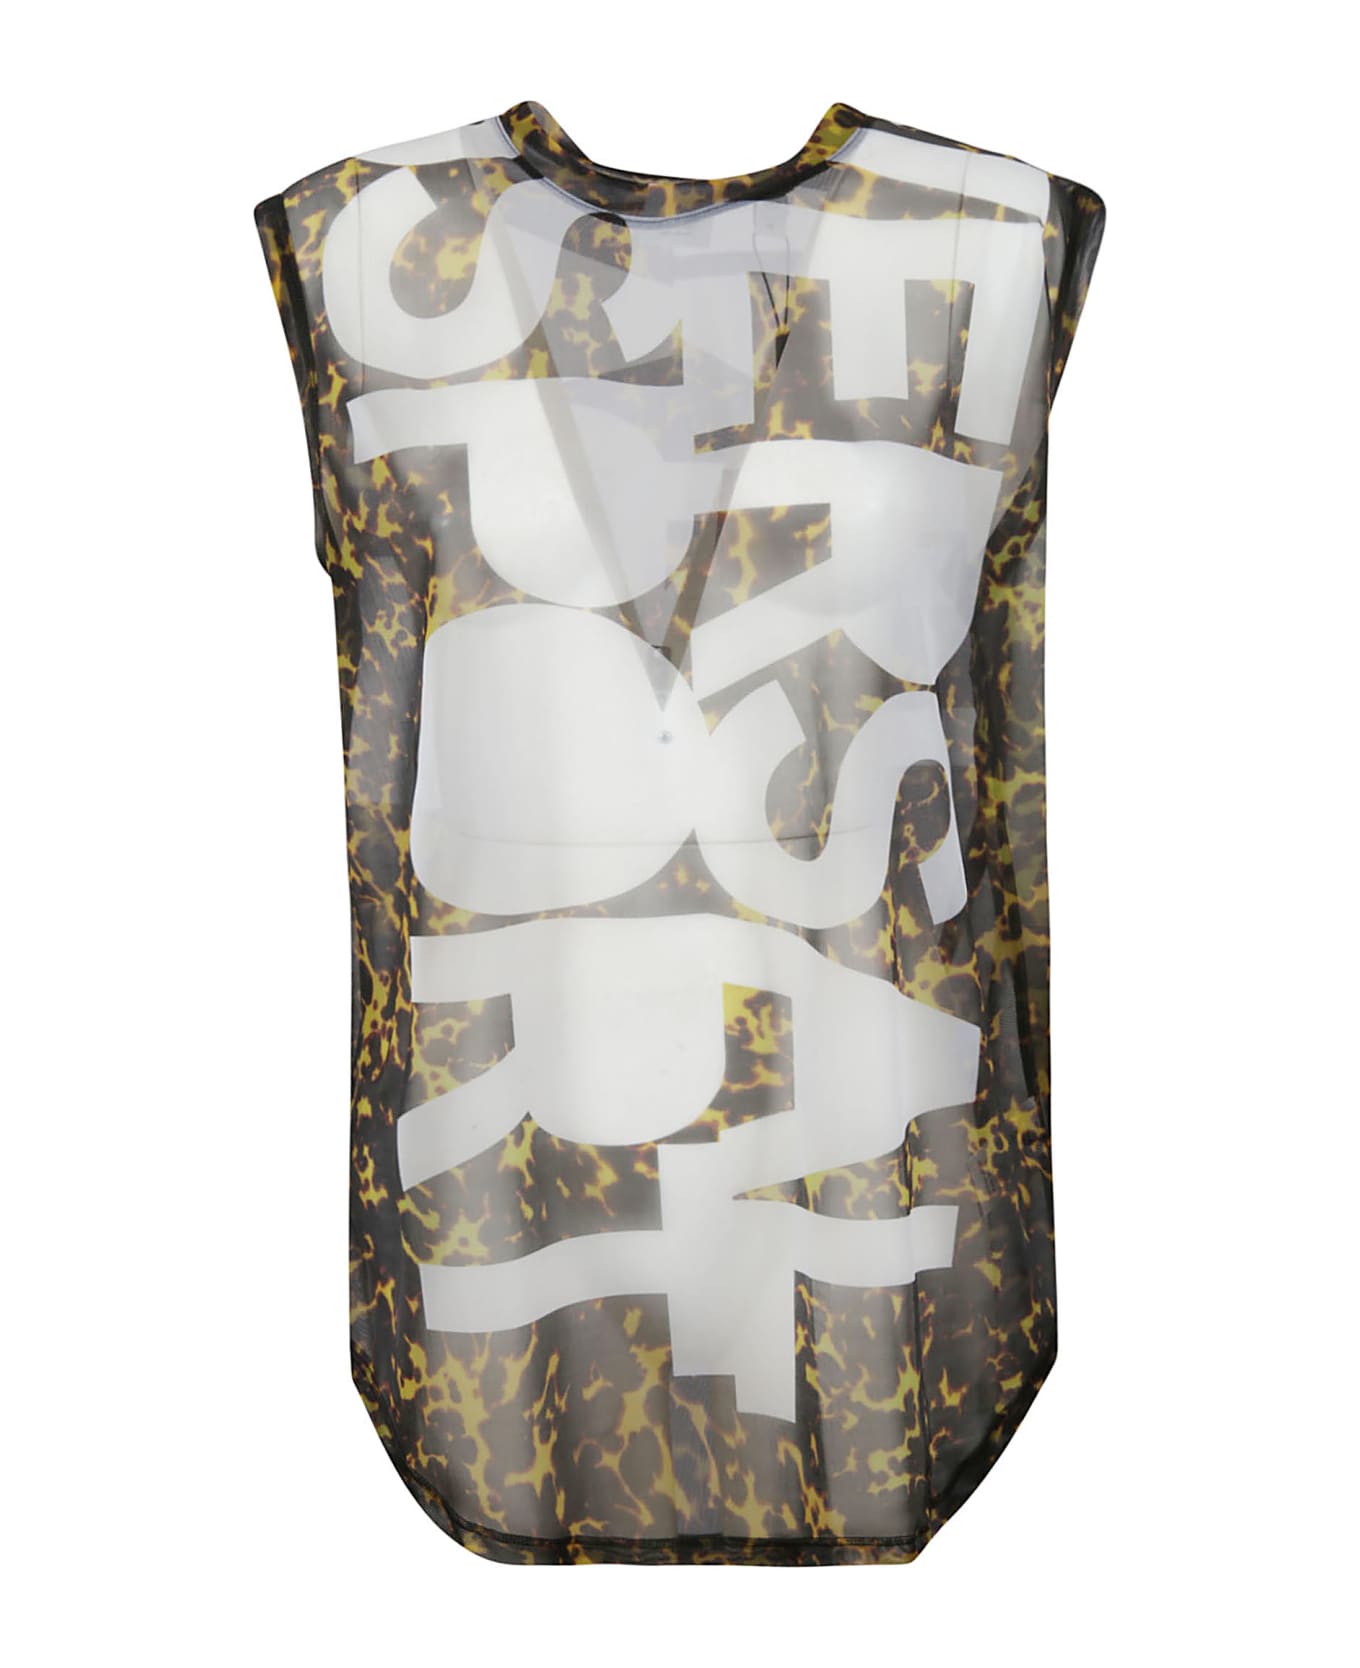 Burberry Sleeveless Printed Lace Top | italist, ALWAYS LIKE A SALE